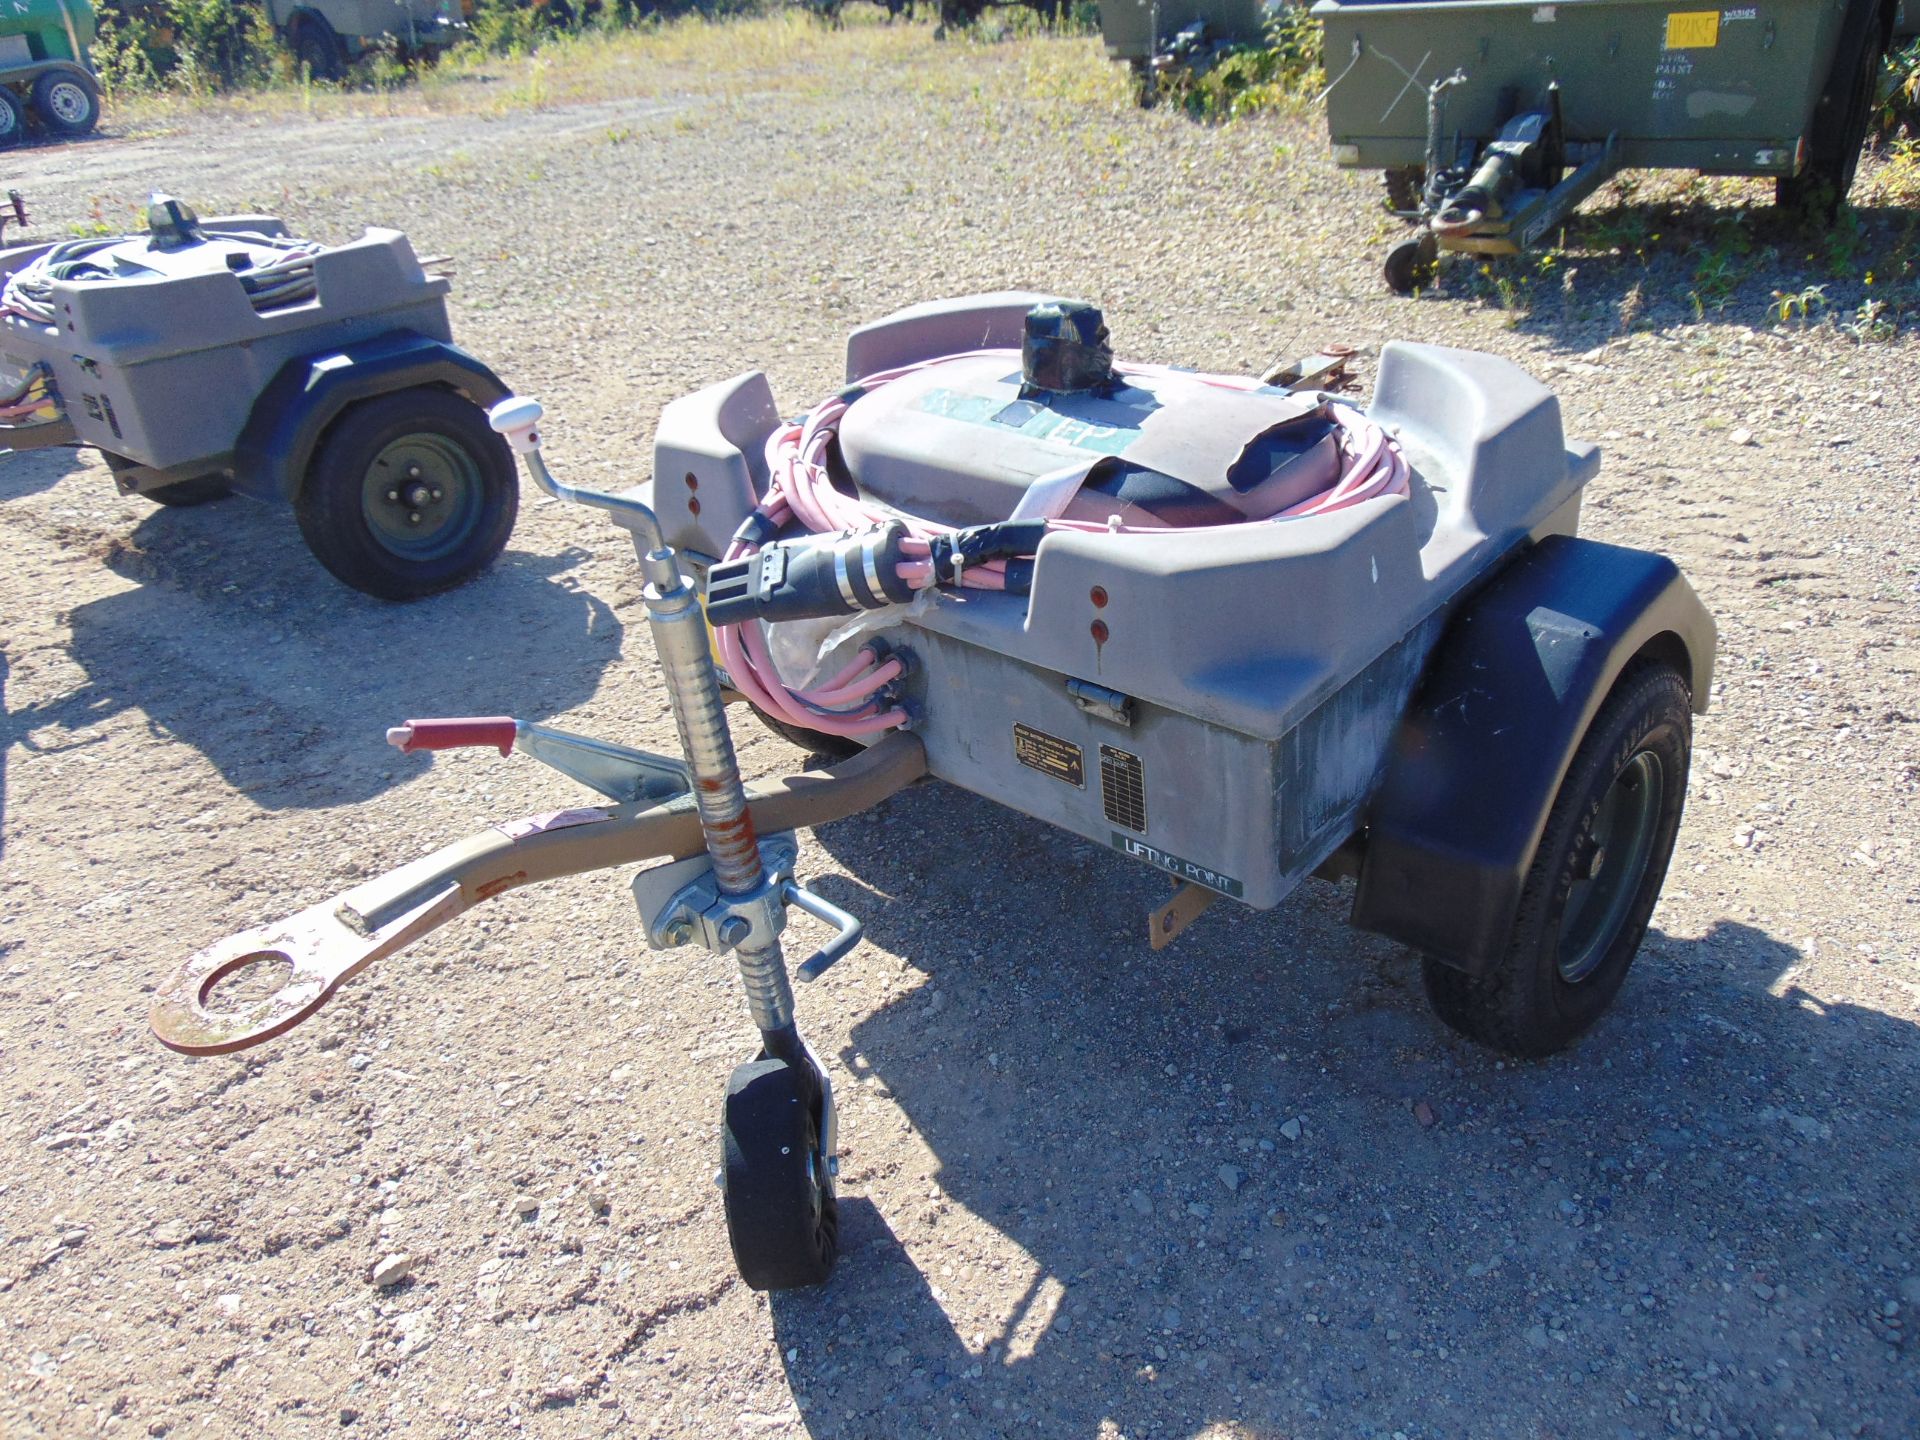 Aircraft Battery Electrical Starter Trolley c/w Batteries and Cables, From RAF - Image 3 of 7